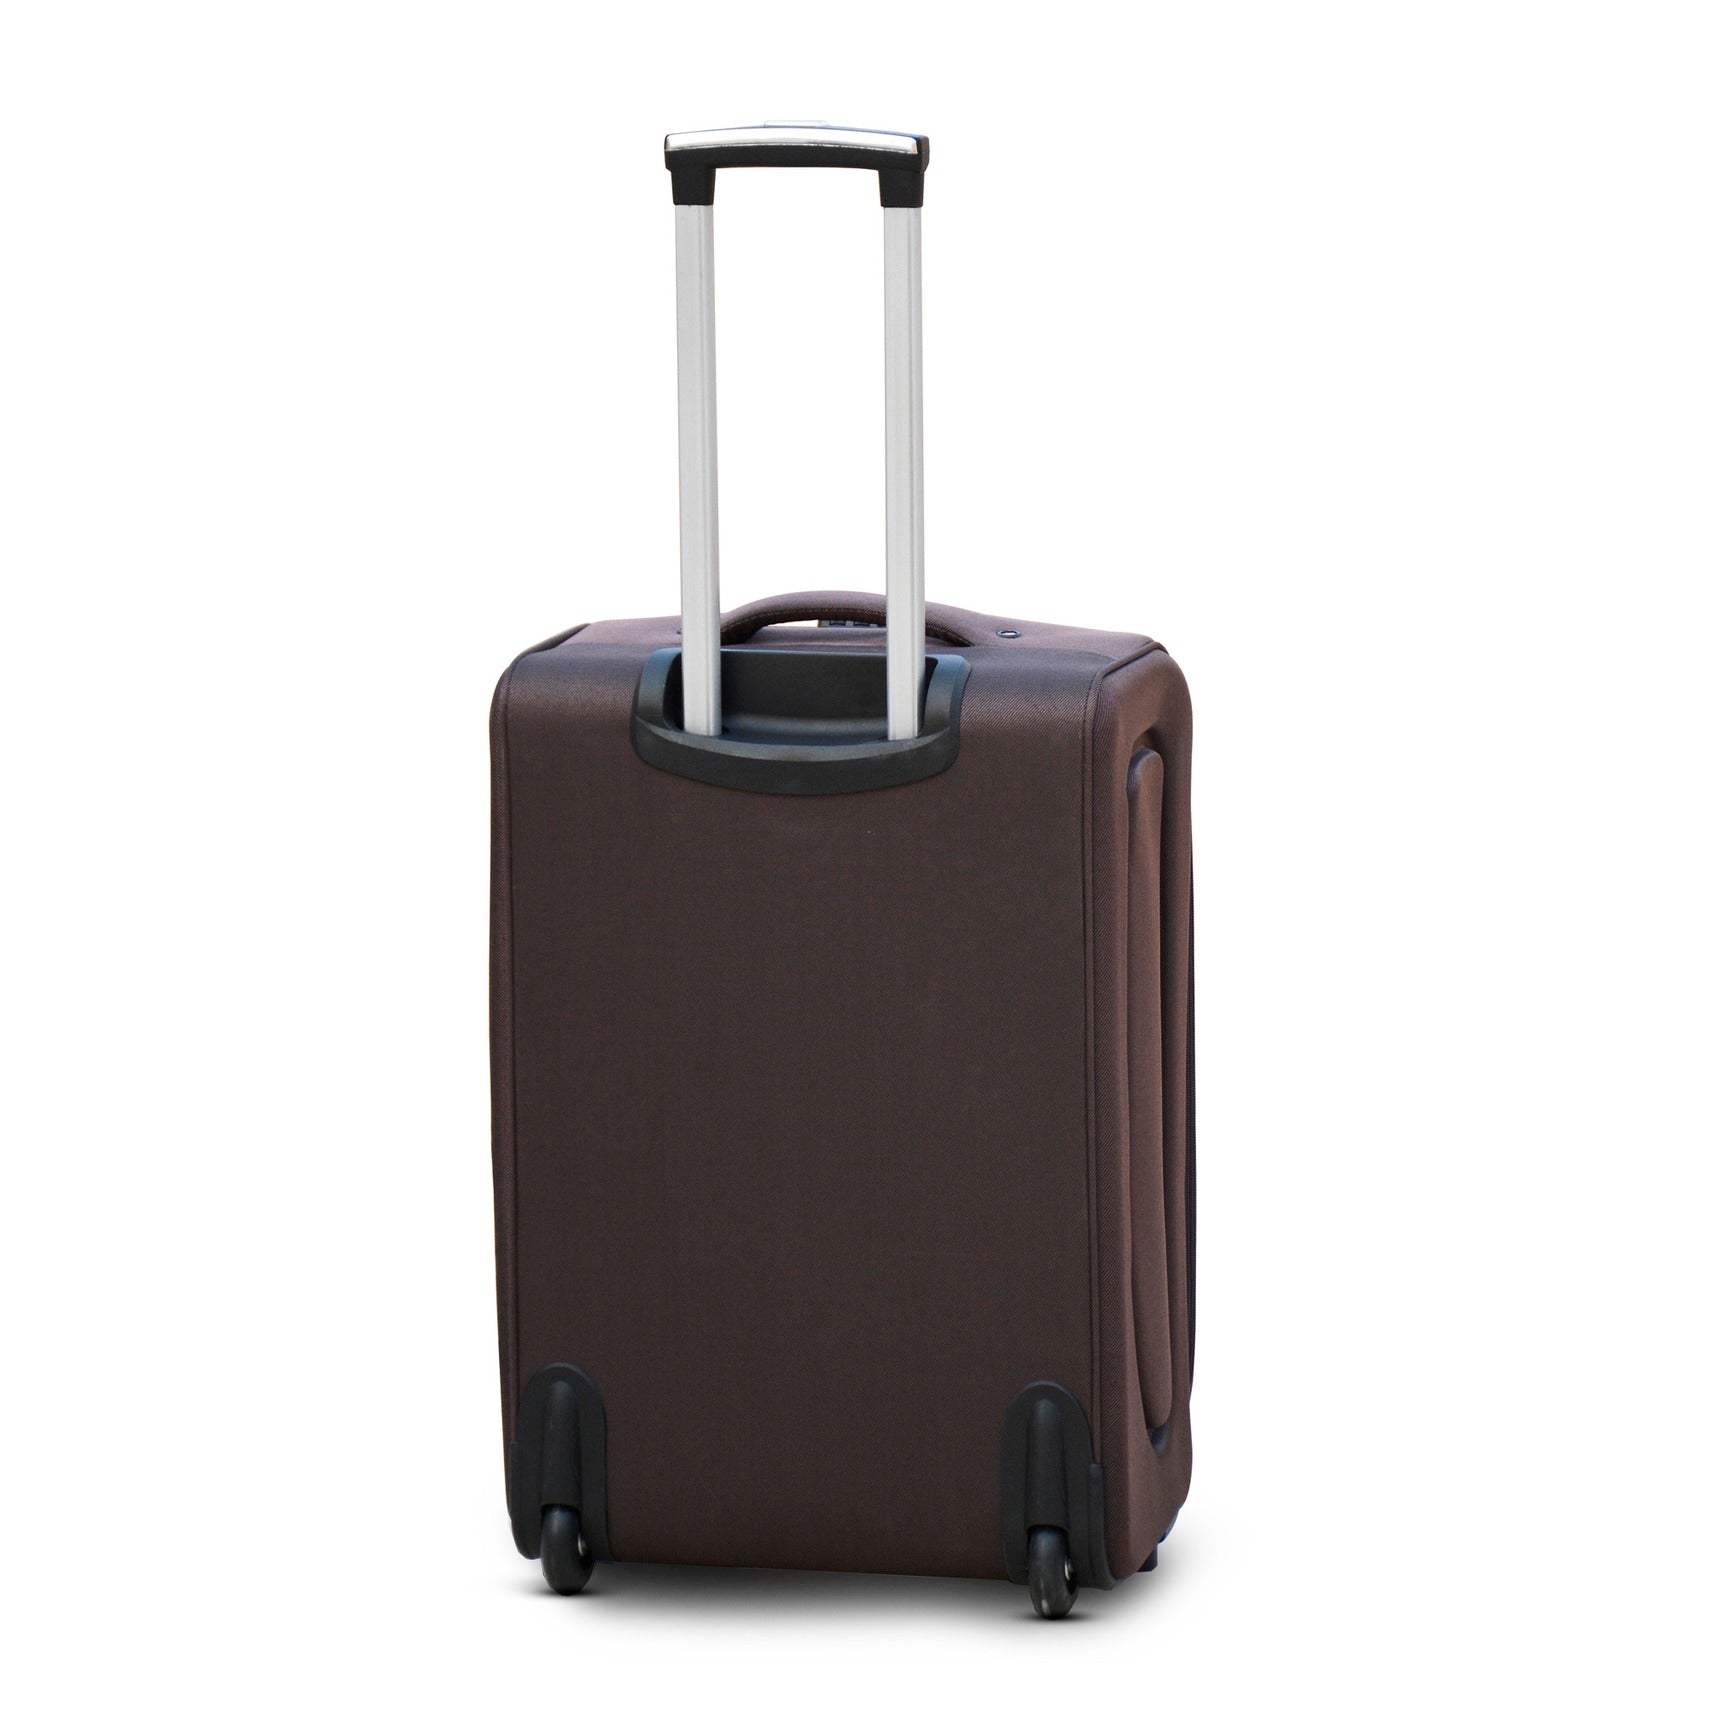 20" Coffee Colour LP 2 Wheel 0161 Luggage Lightweight Soft Material Carry On Trolley Bag